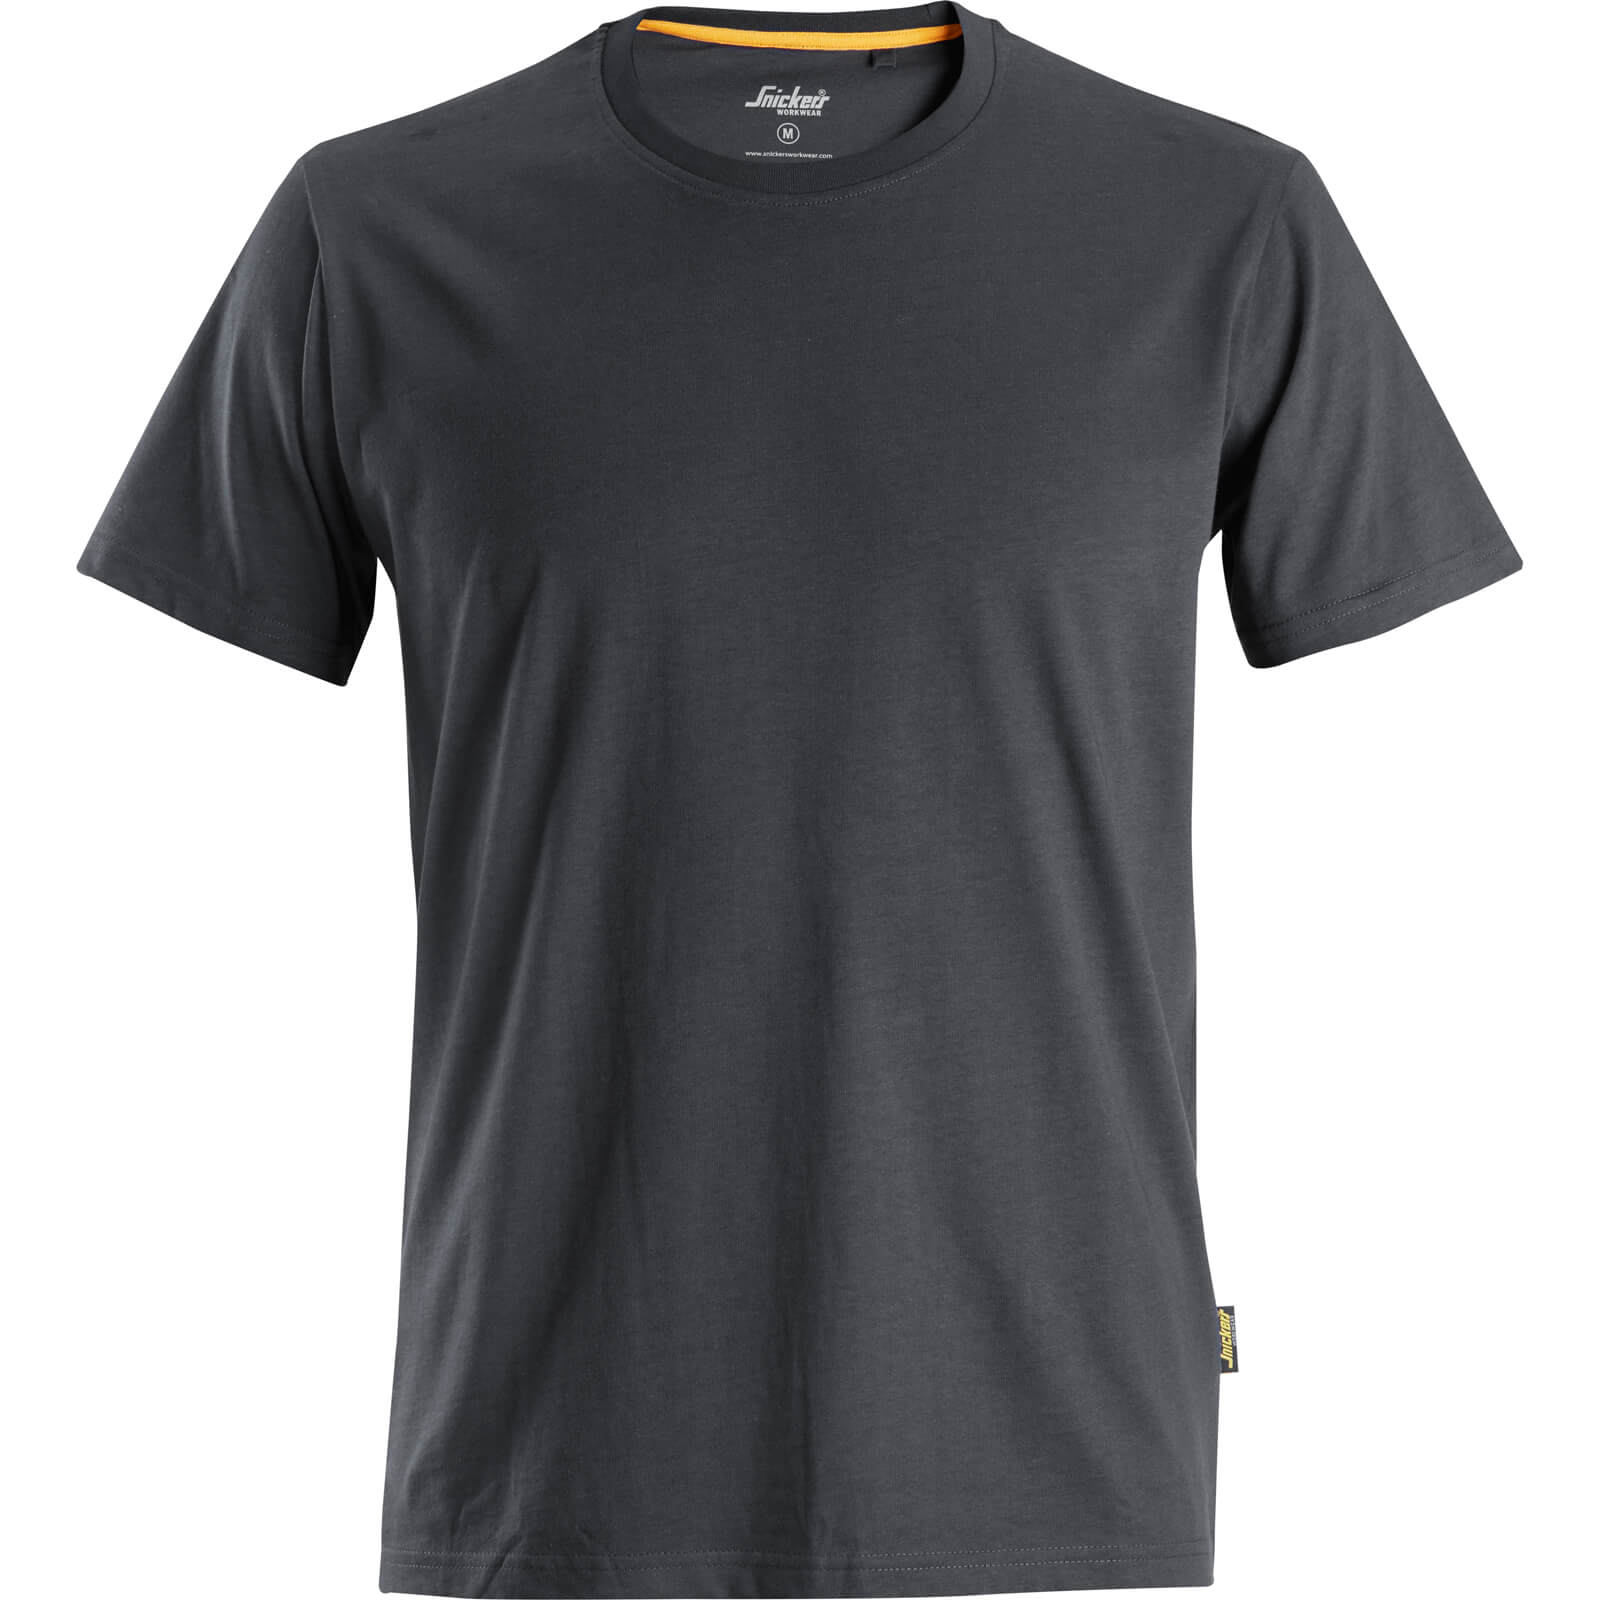 Image of Snickers Allround Work Organic Cotton T Shirt Grey S